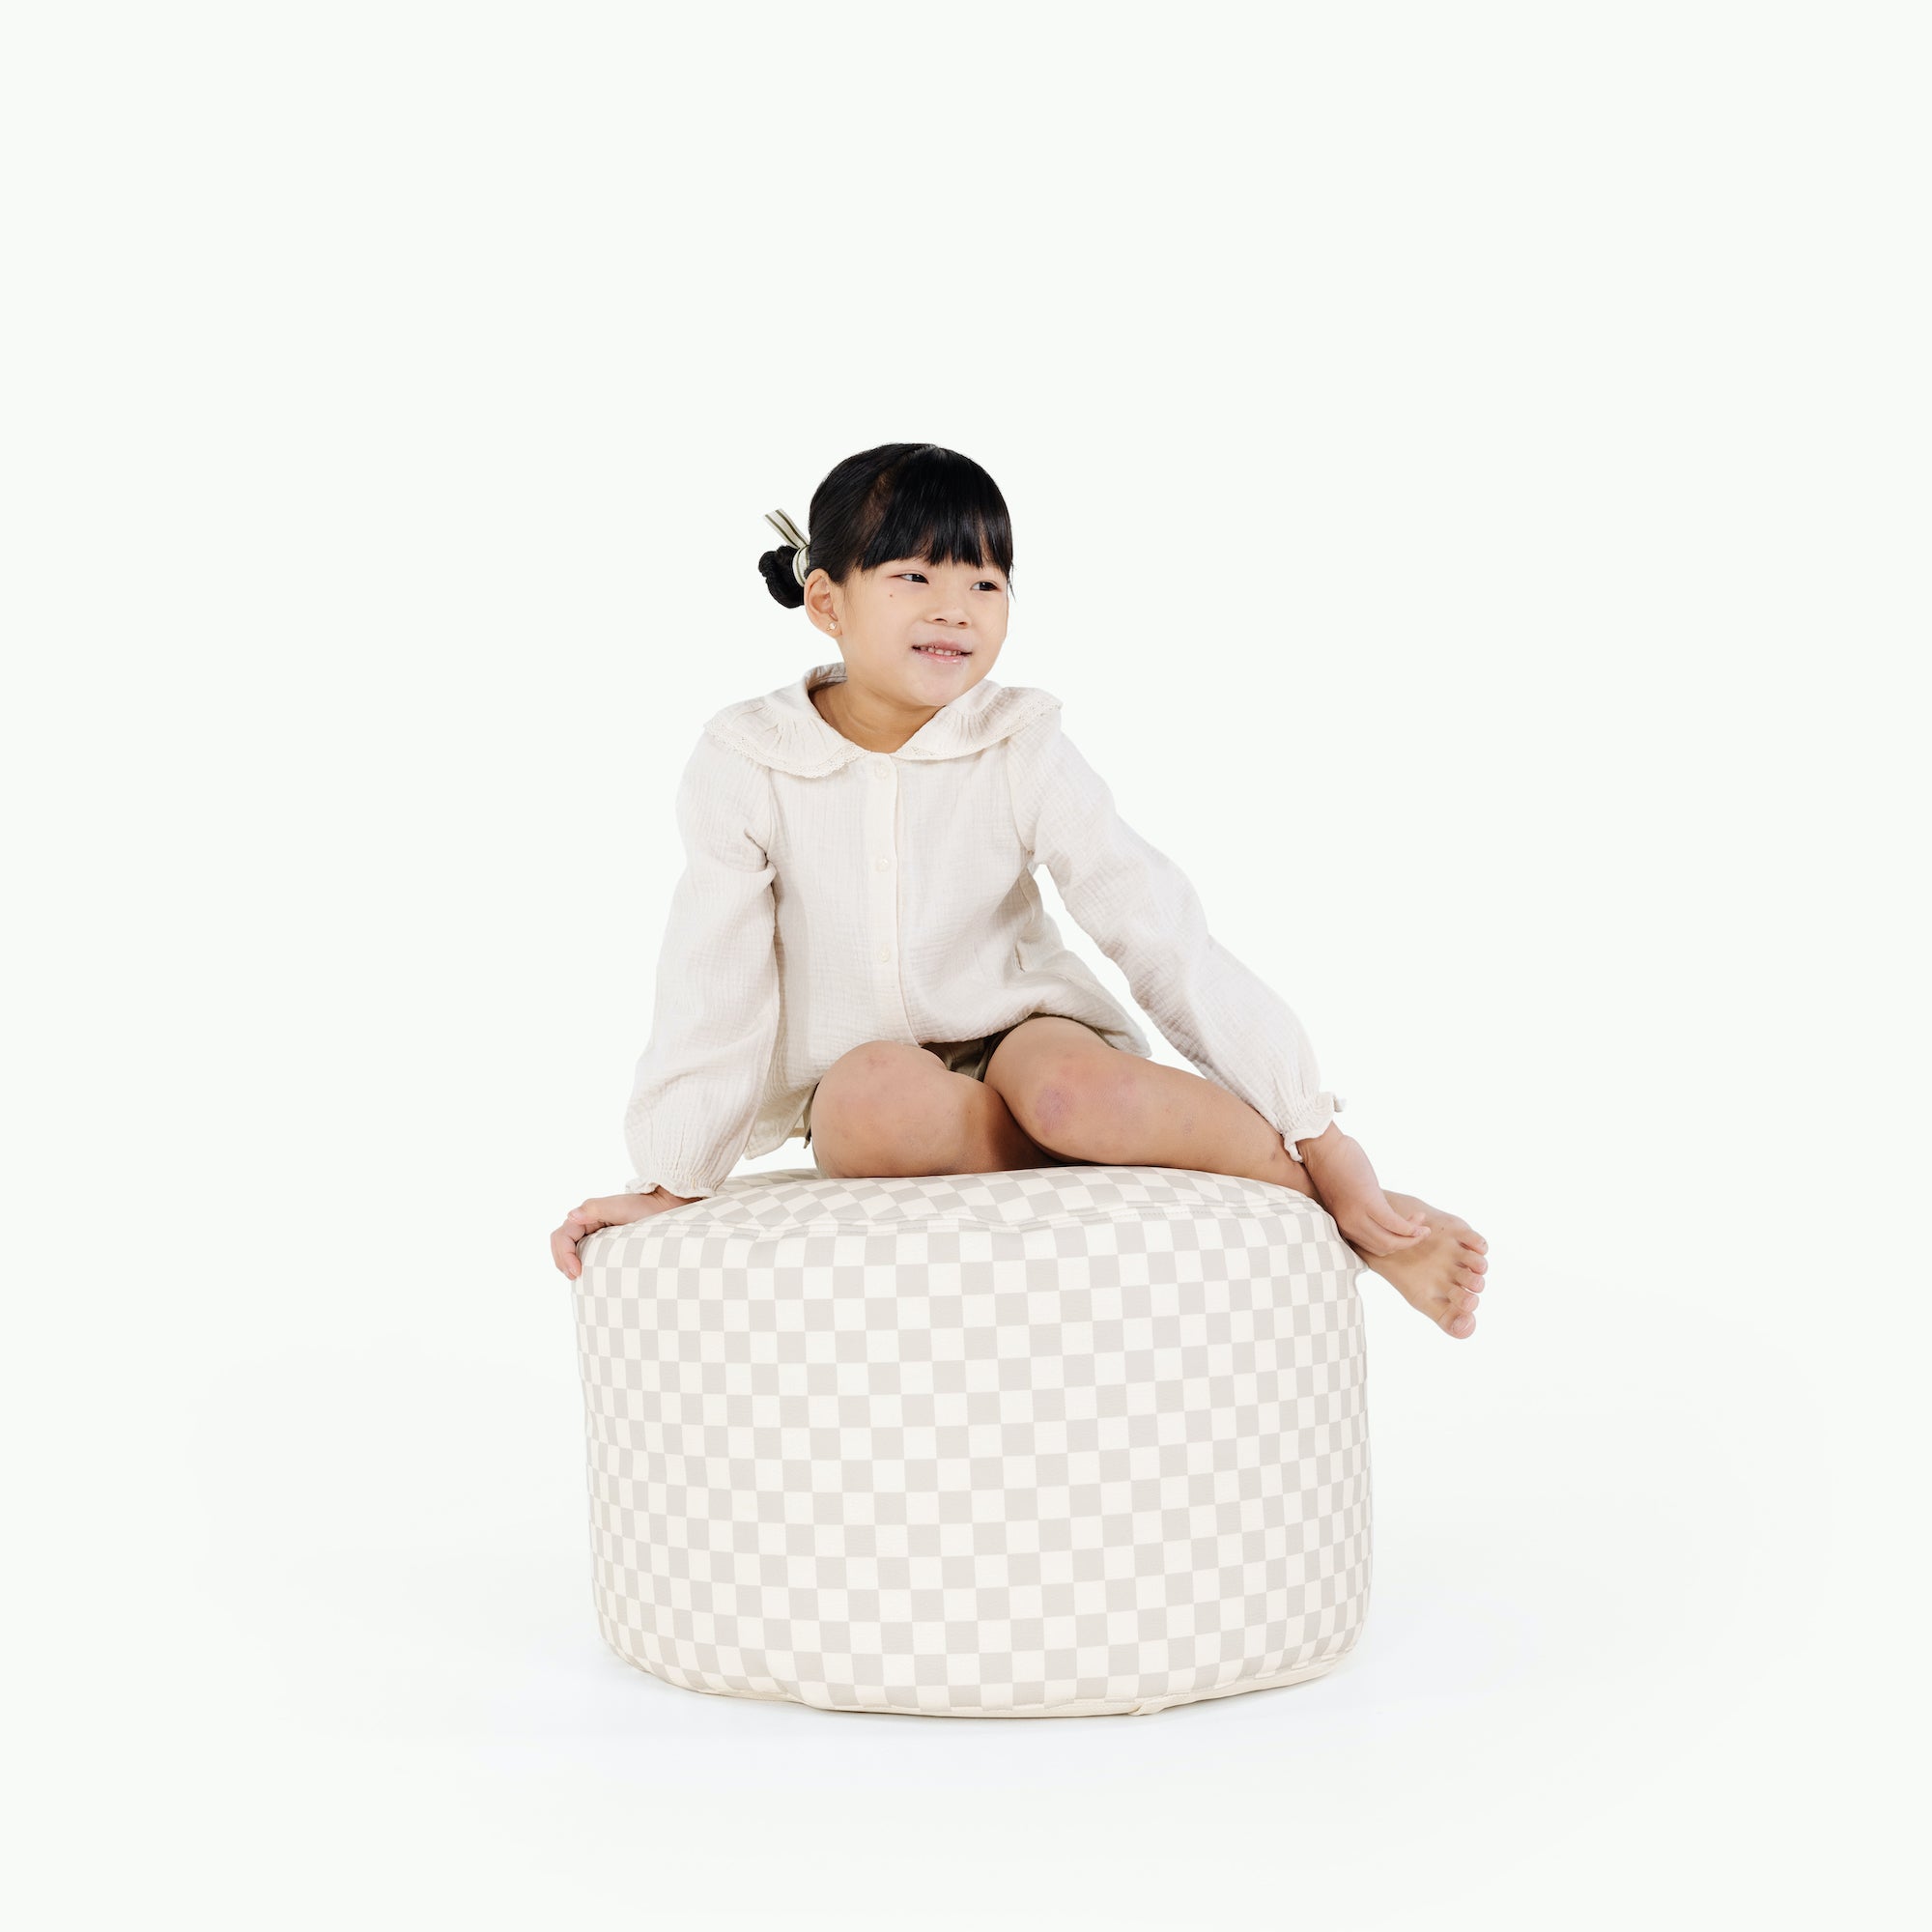 Rook / Circle@little girl sitting on pouf